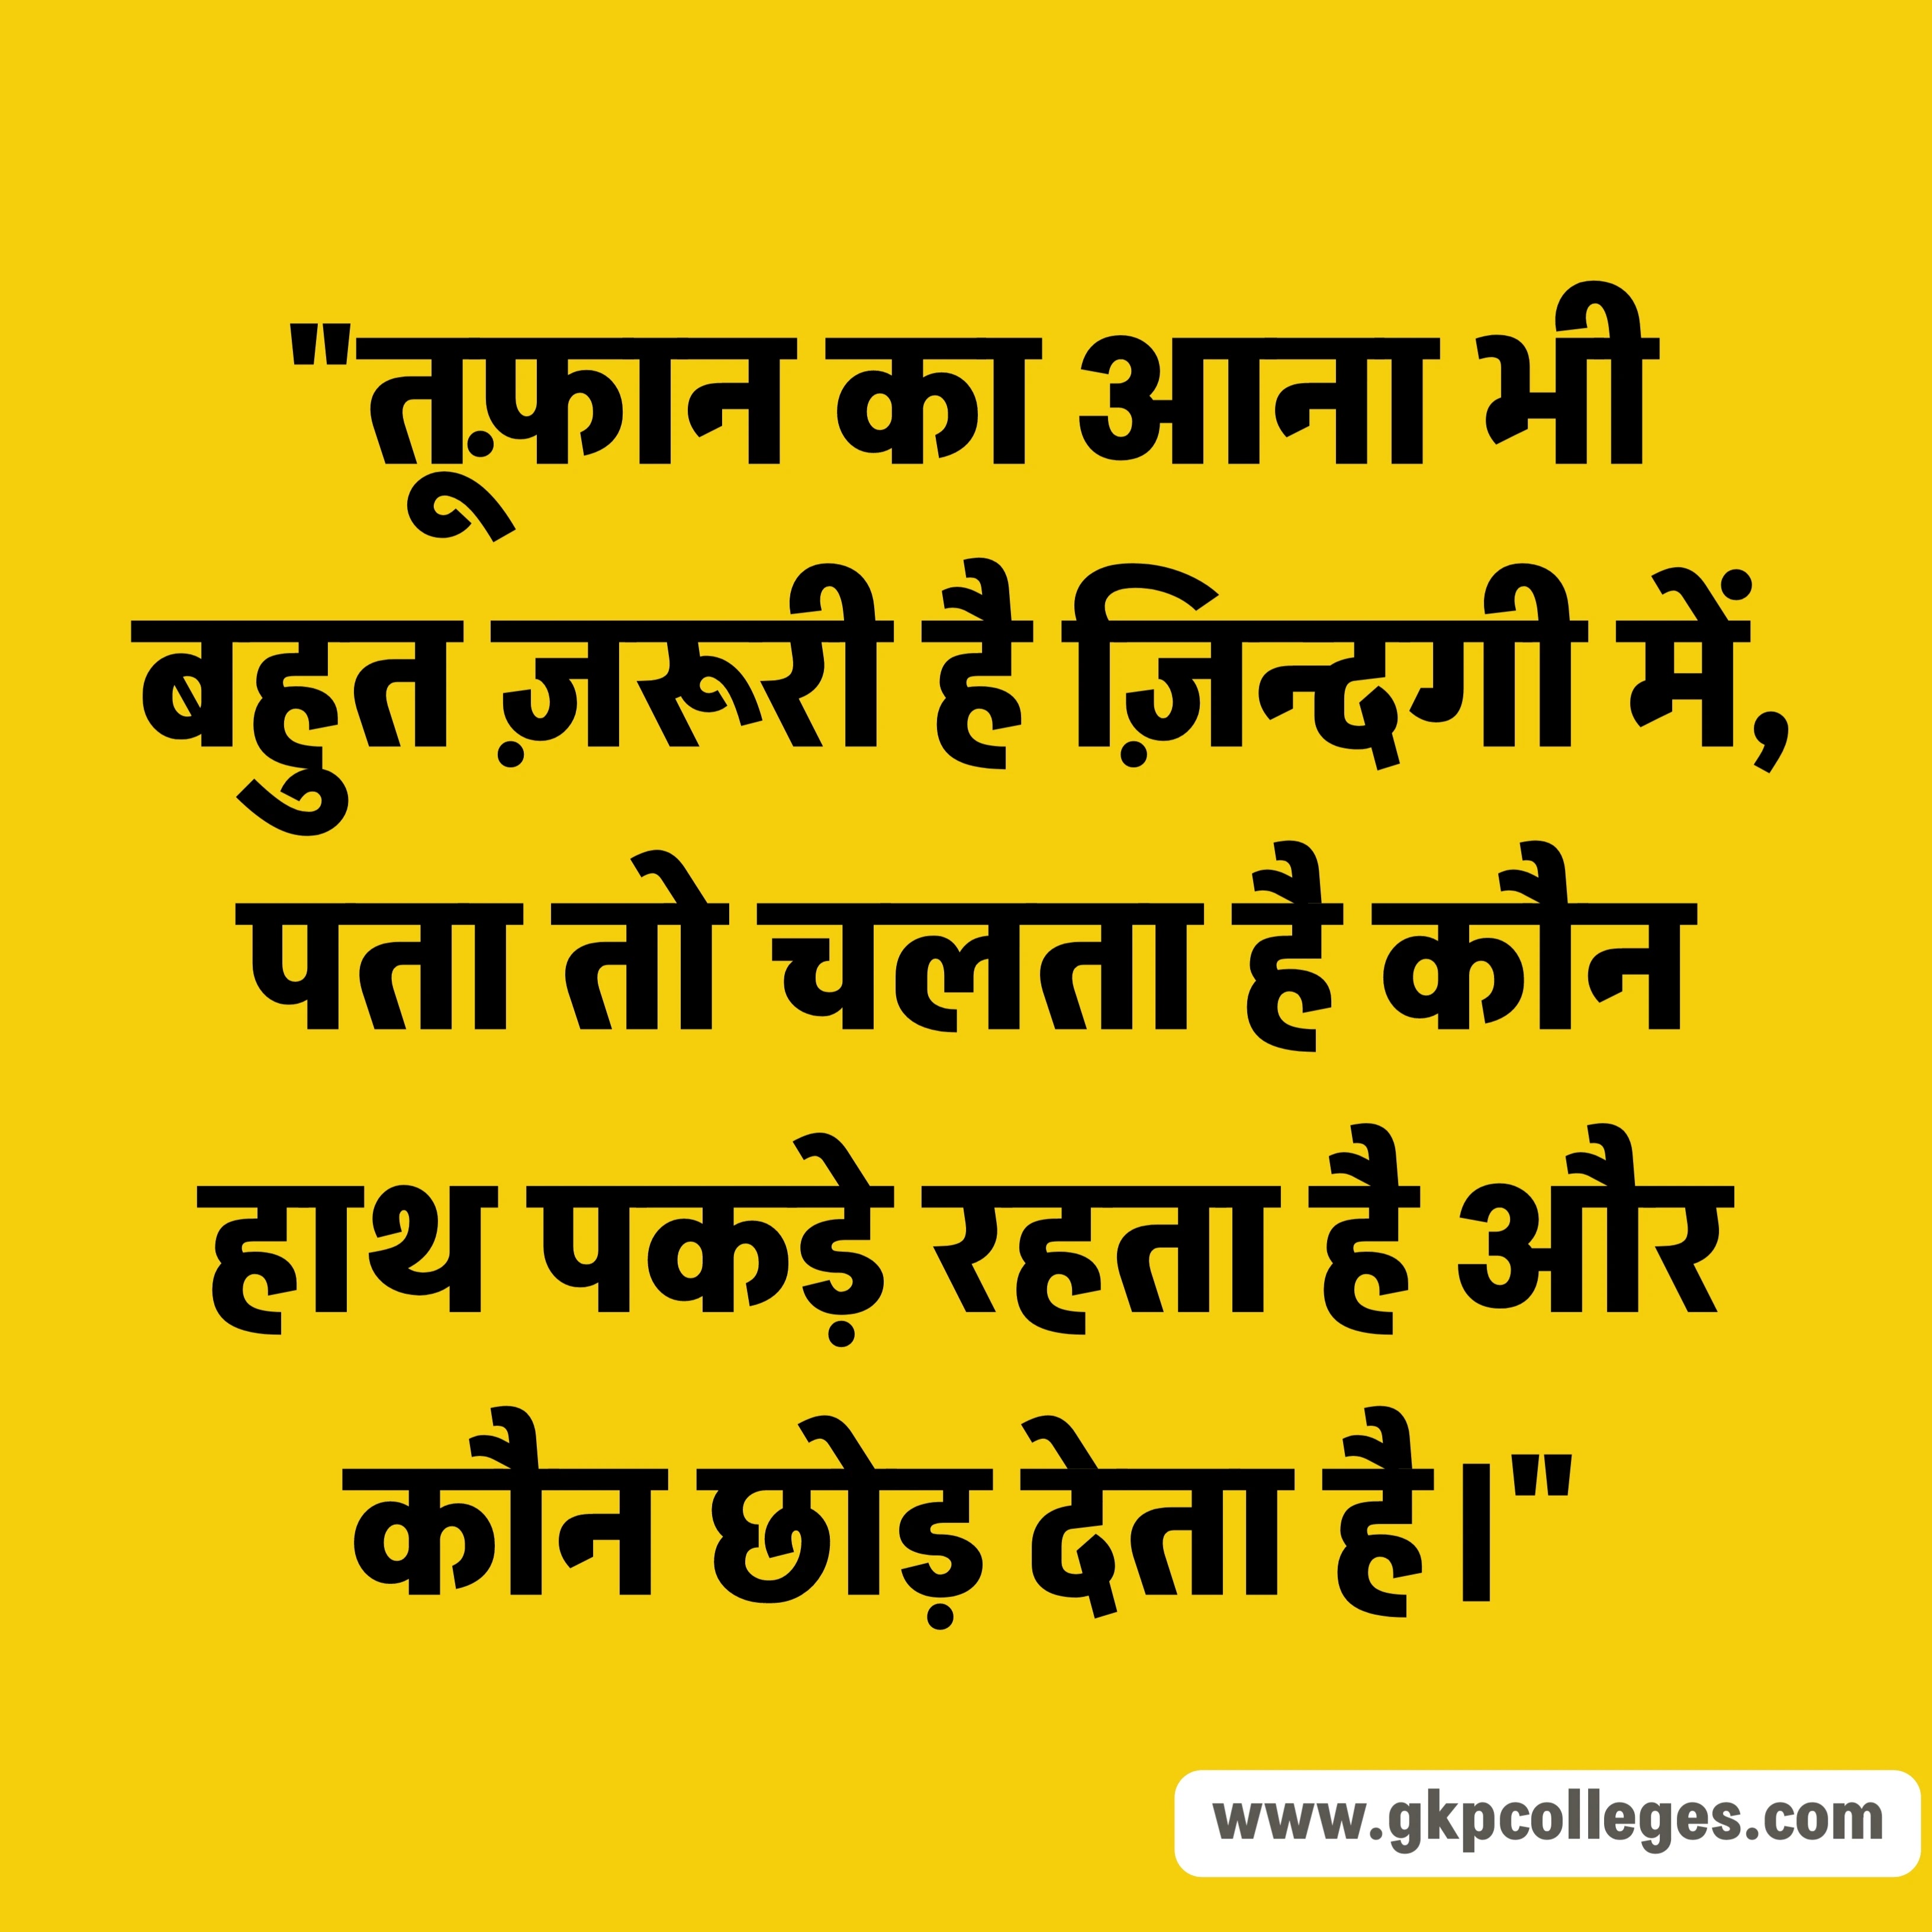 Best Hindi Quotes on Life 6